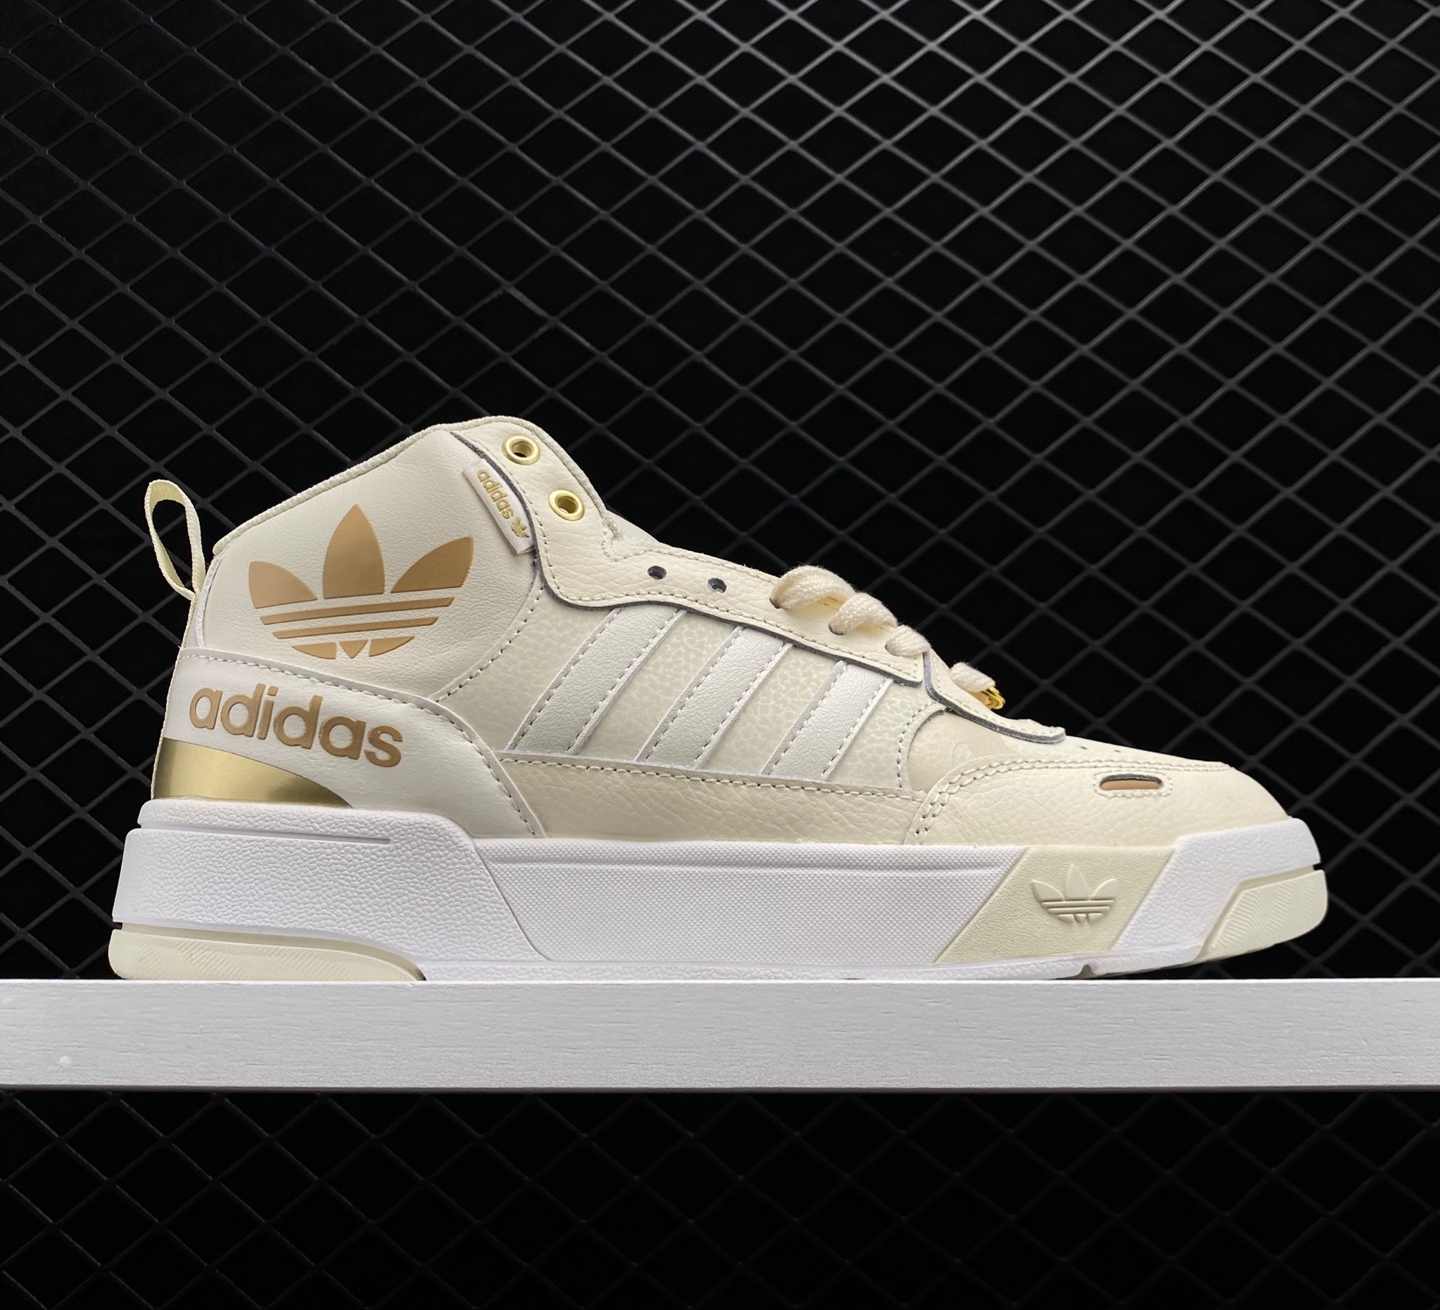 Adidas Originals Post up 'White Gold' H00218 - Premium Sneakers for Style Enthusiasts